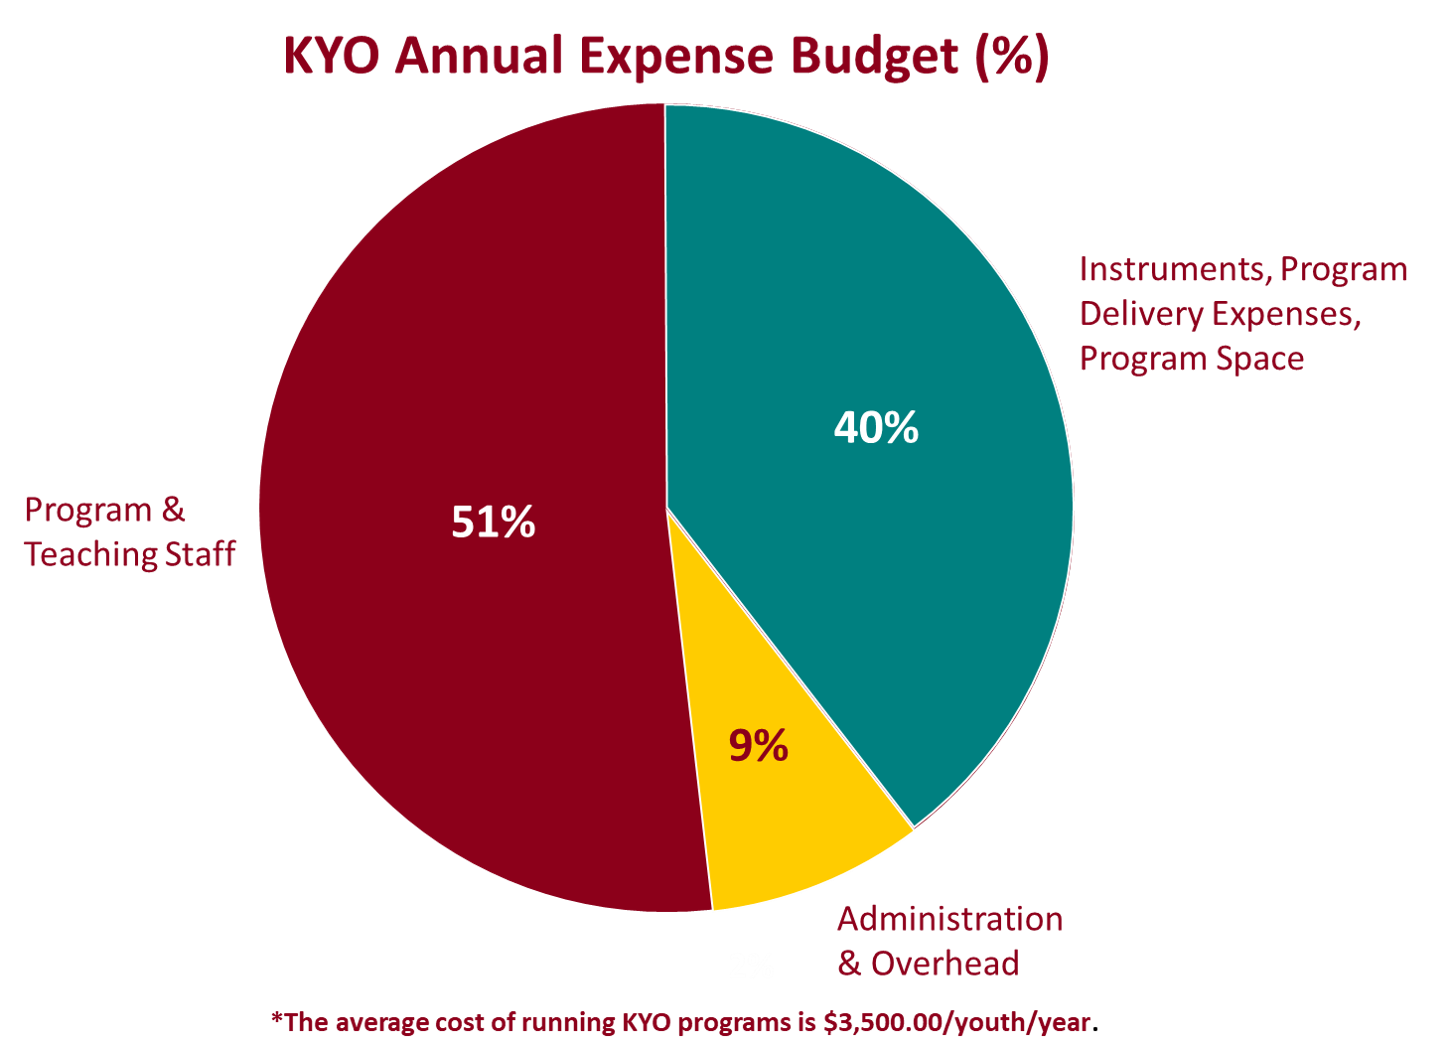 51%: Program & Teaching Staff, 40%: Instruments, Program Delivery Expenses, Program Space, 9%: Administration & Overheat. *Note: The average cost of running KYO programs is $5500 per youth per year.